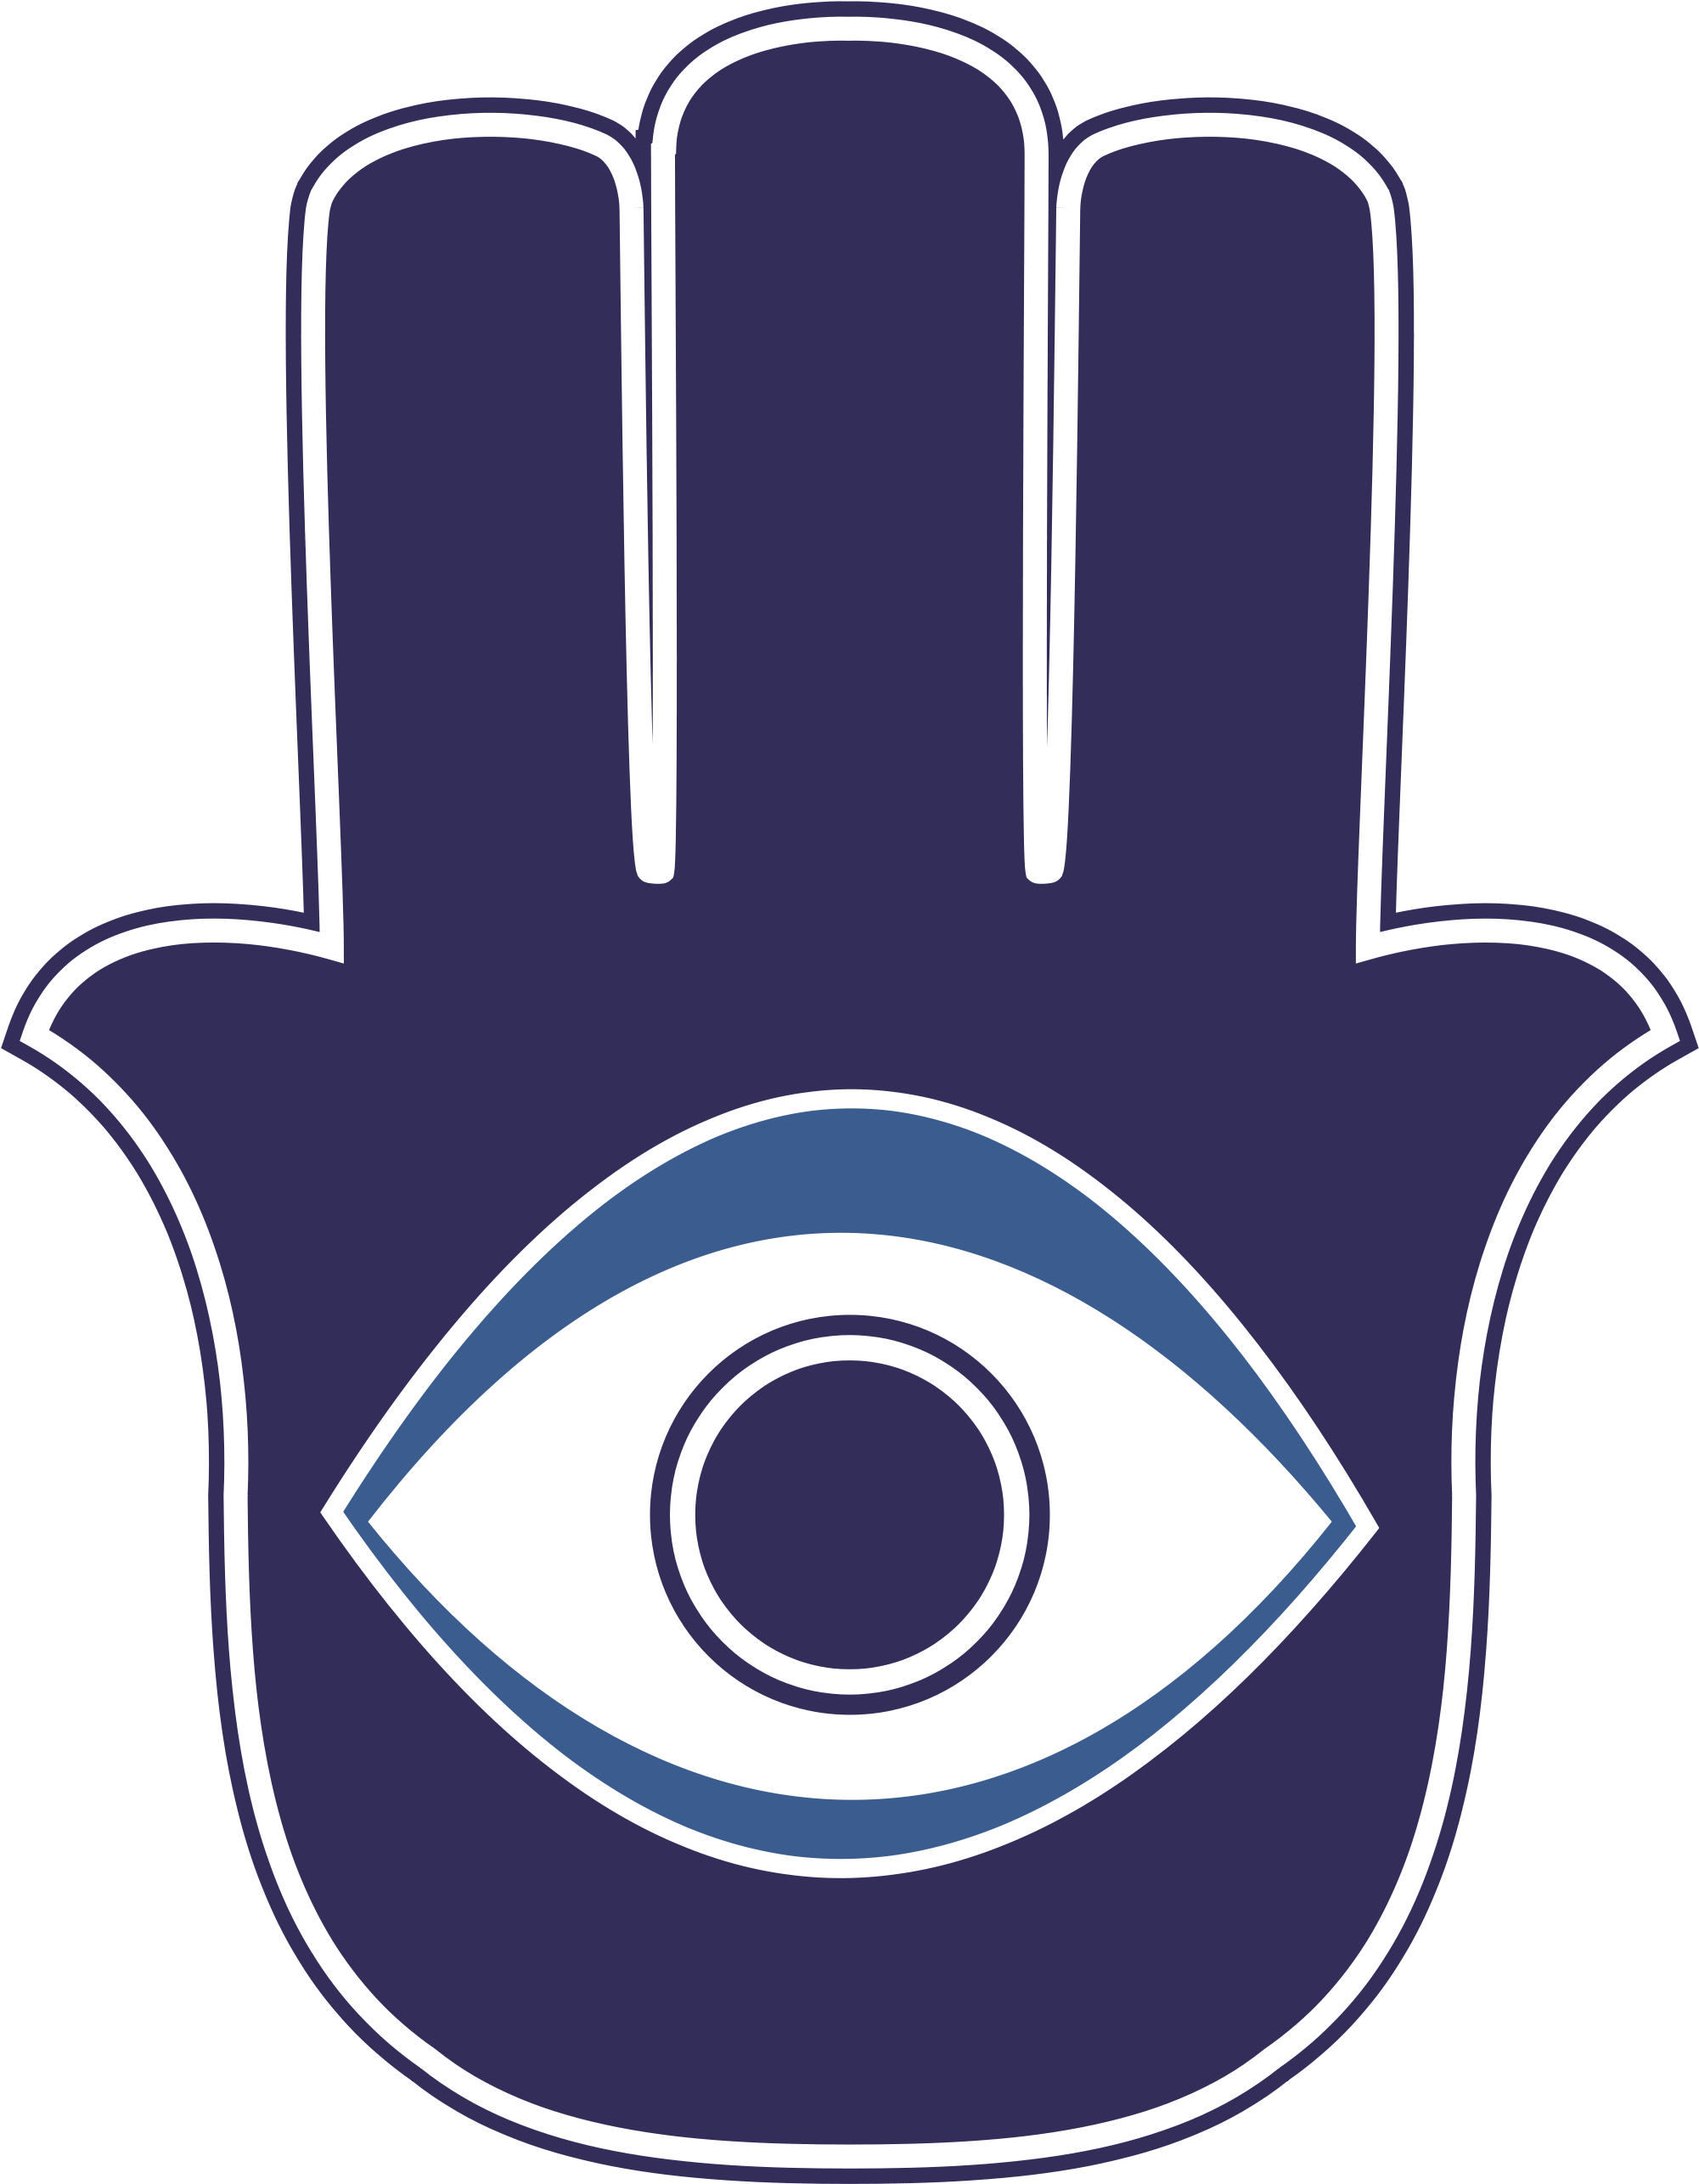 The Evil Is An Ancient Symbol,this Image Is Said To - Hand Of God Symbol (2000x2581)